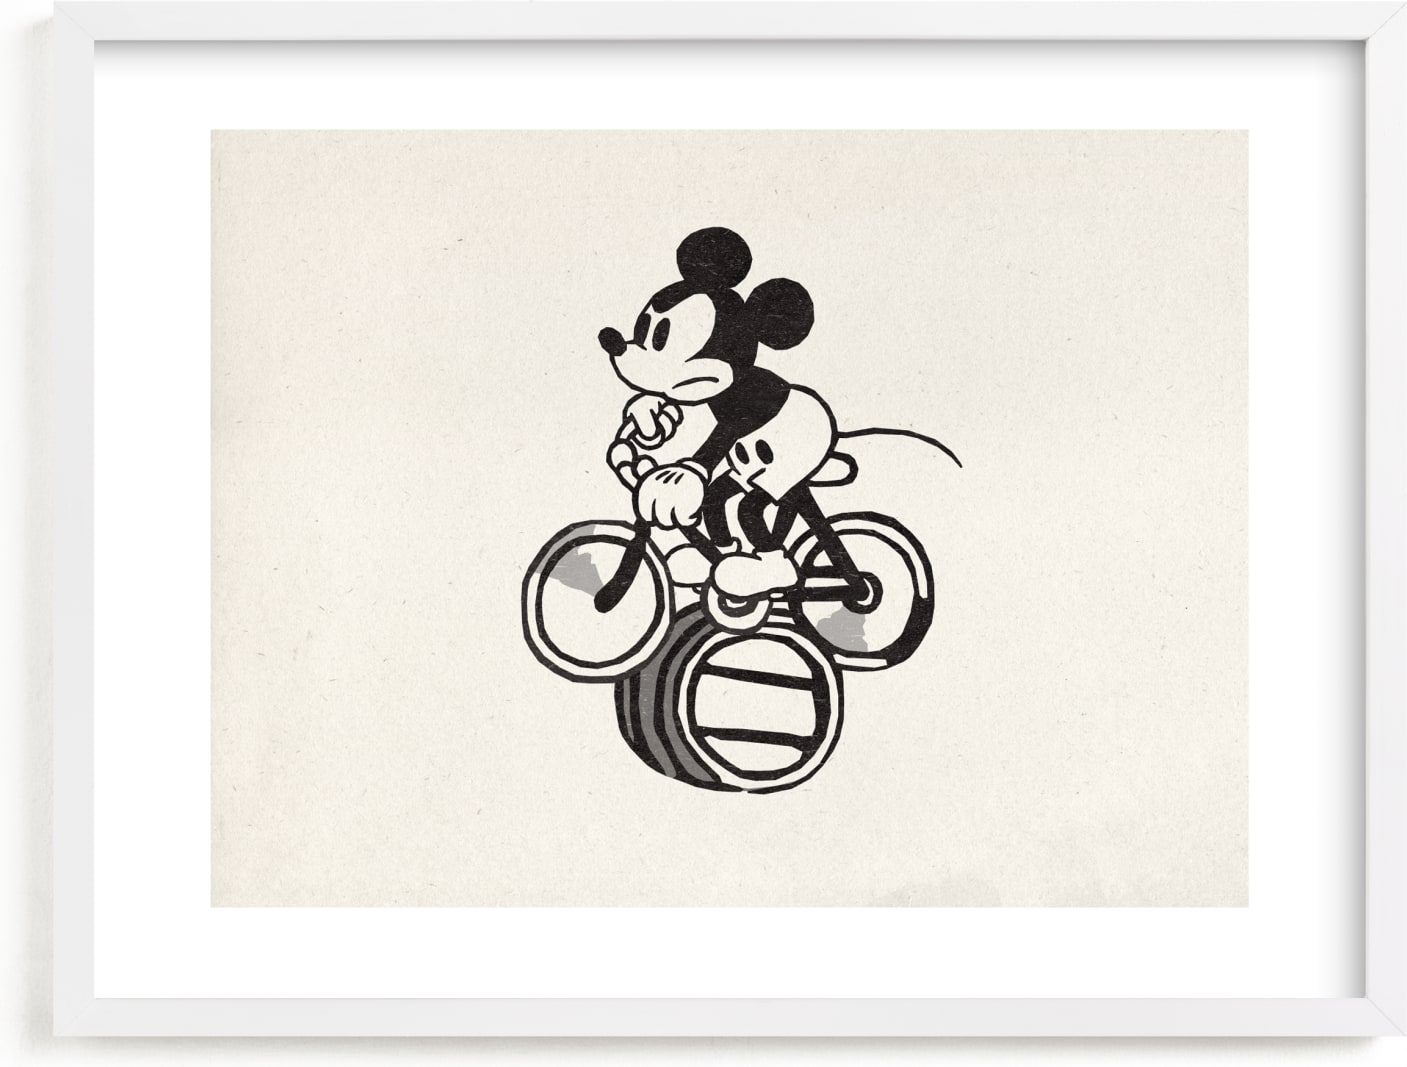 This is a black and white disney art by Sumak Studio called Disney's Mickey Mouse Riding A Bicycle.